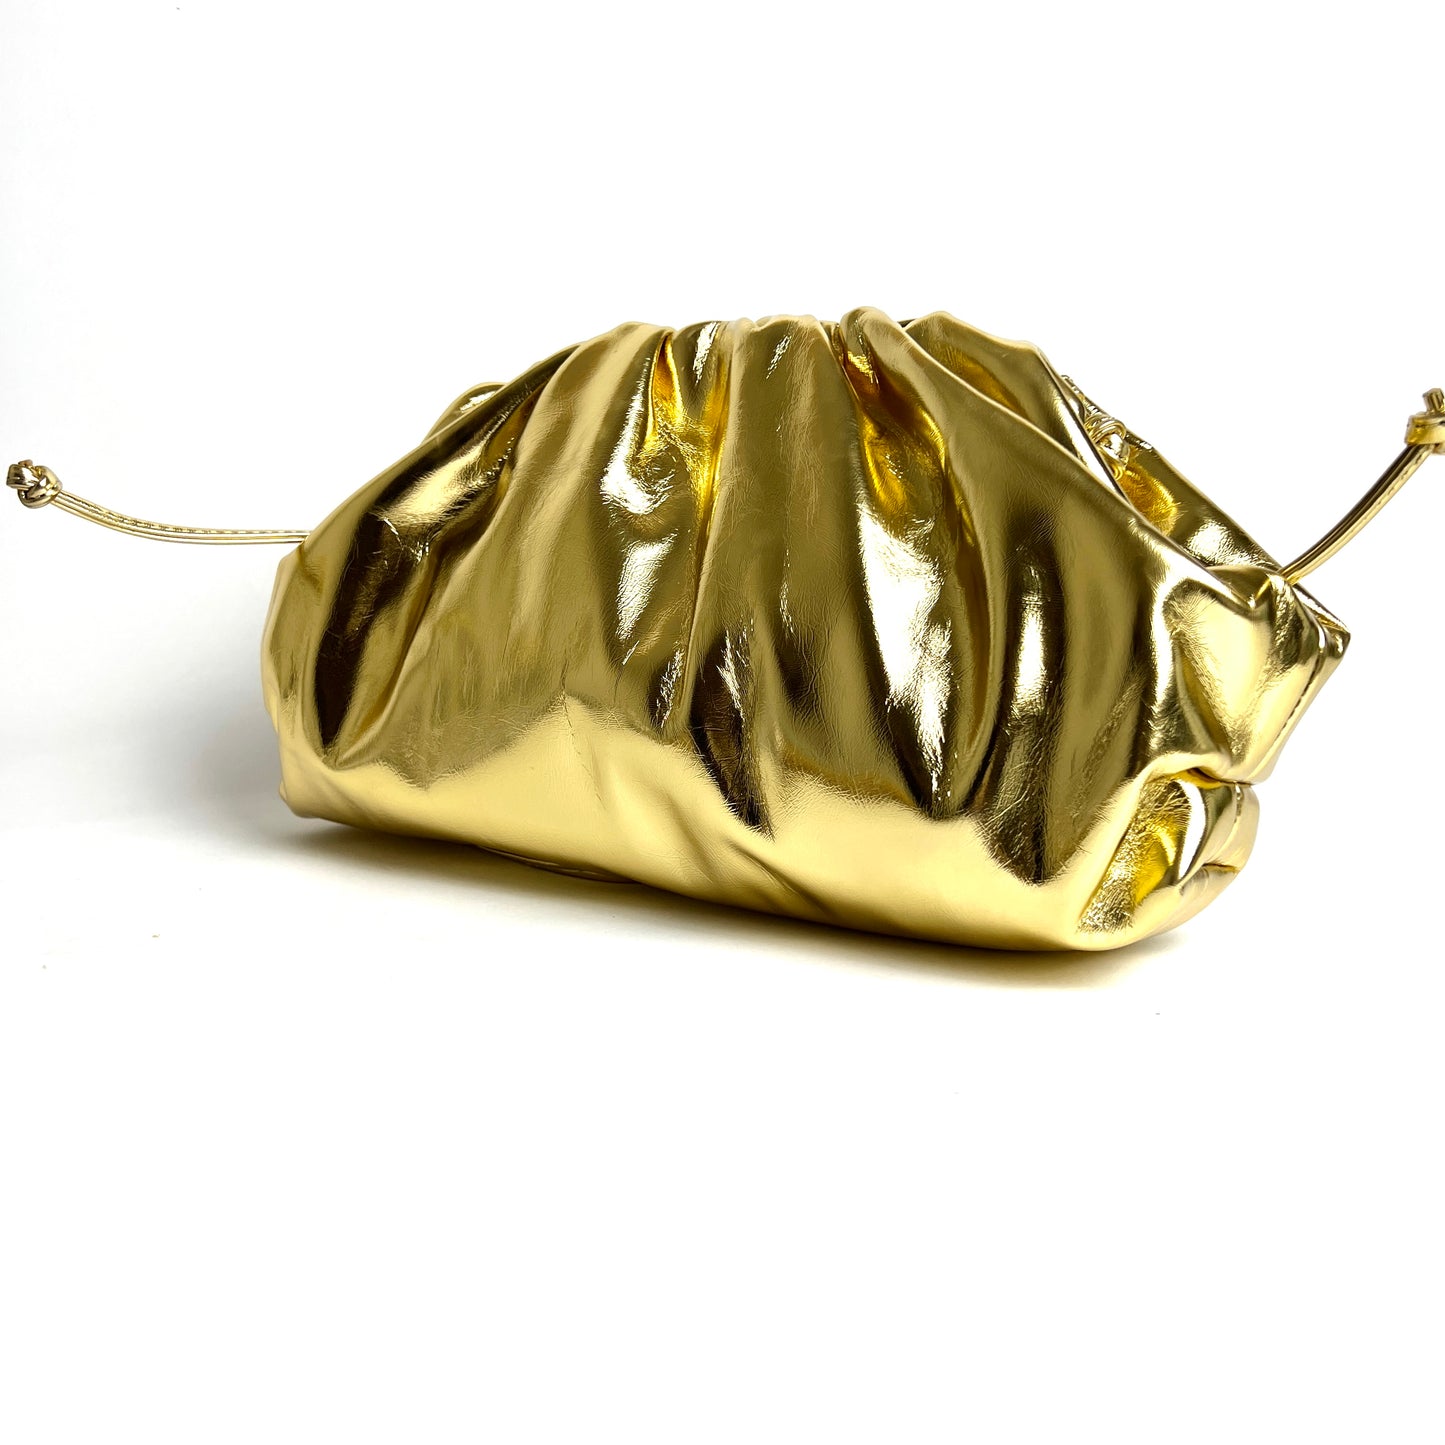 Gold Metallic Clutch Bag - Large - Little Touch